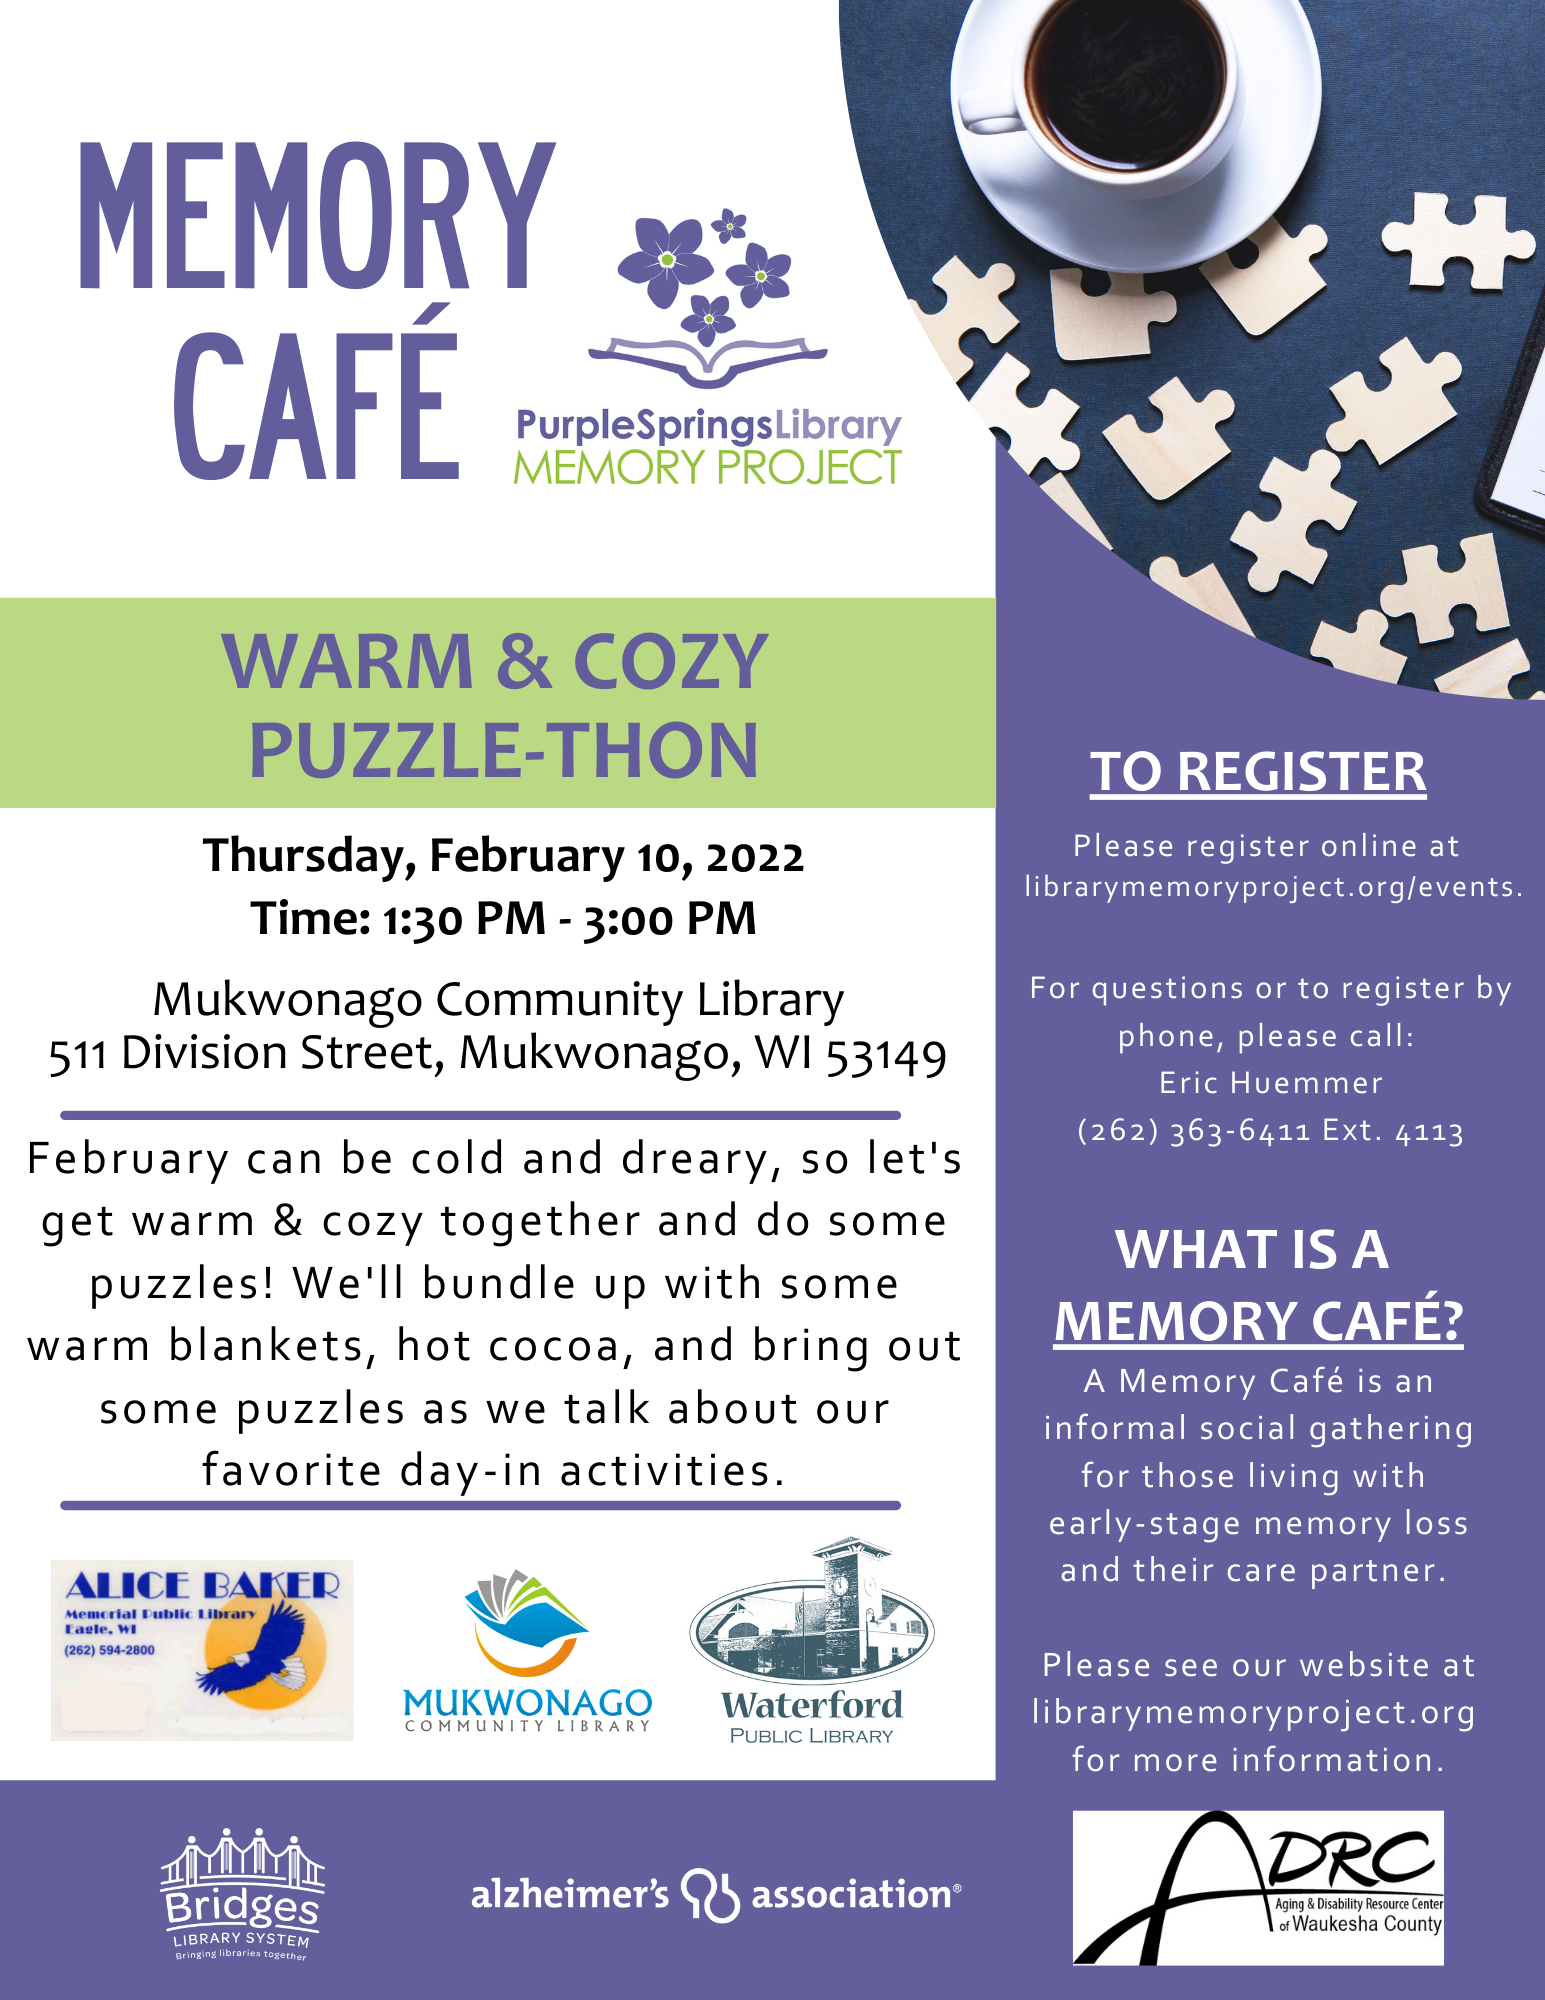 Memory Cafe Flyers 2.22